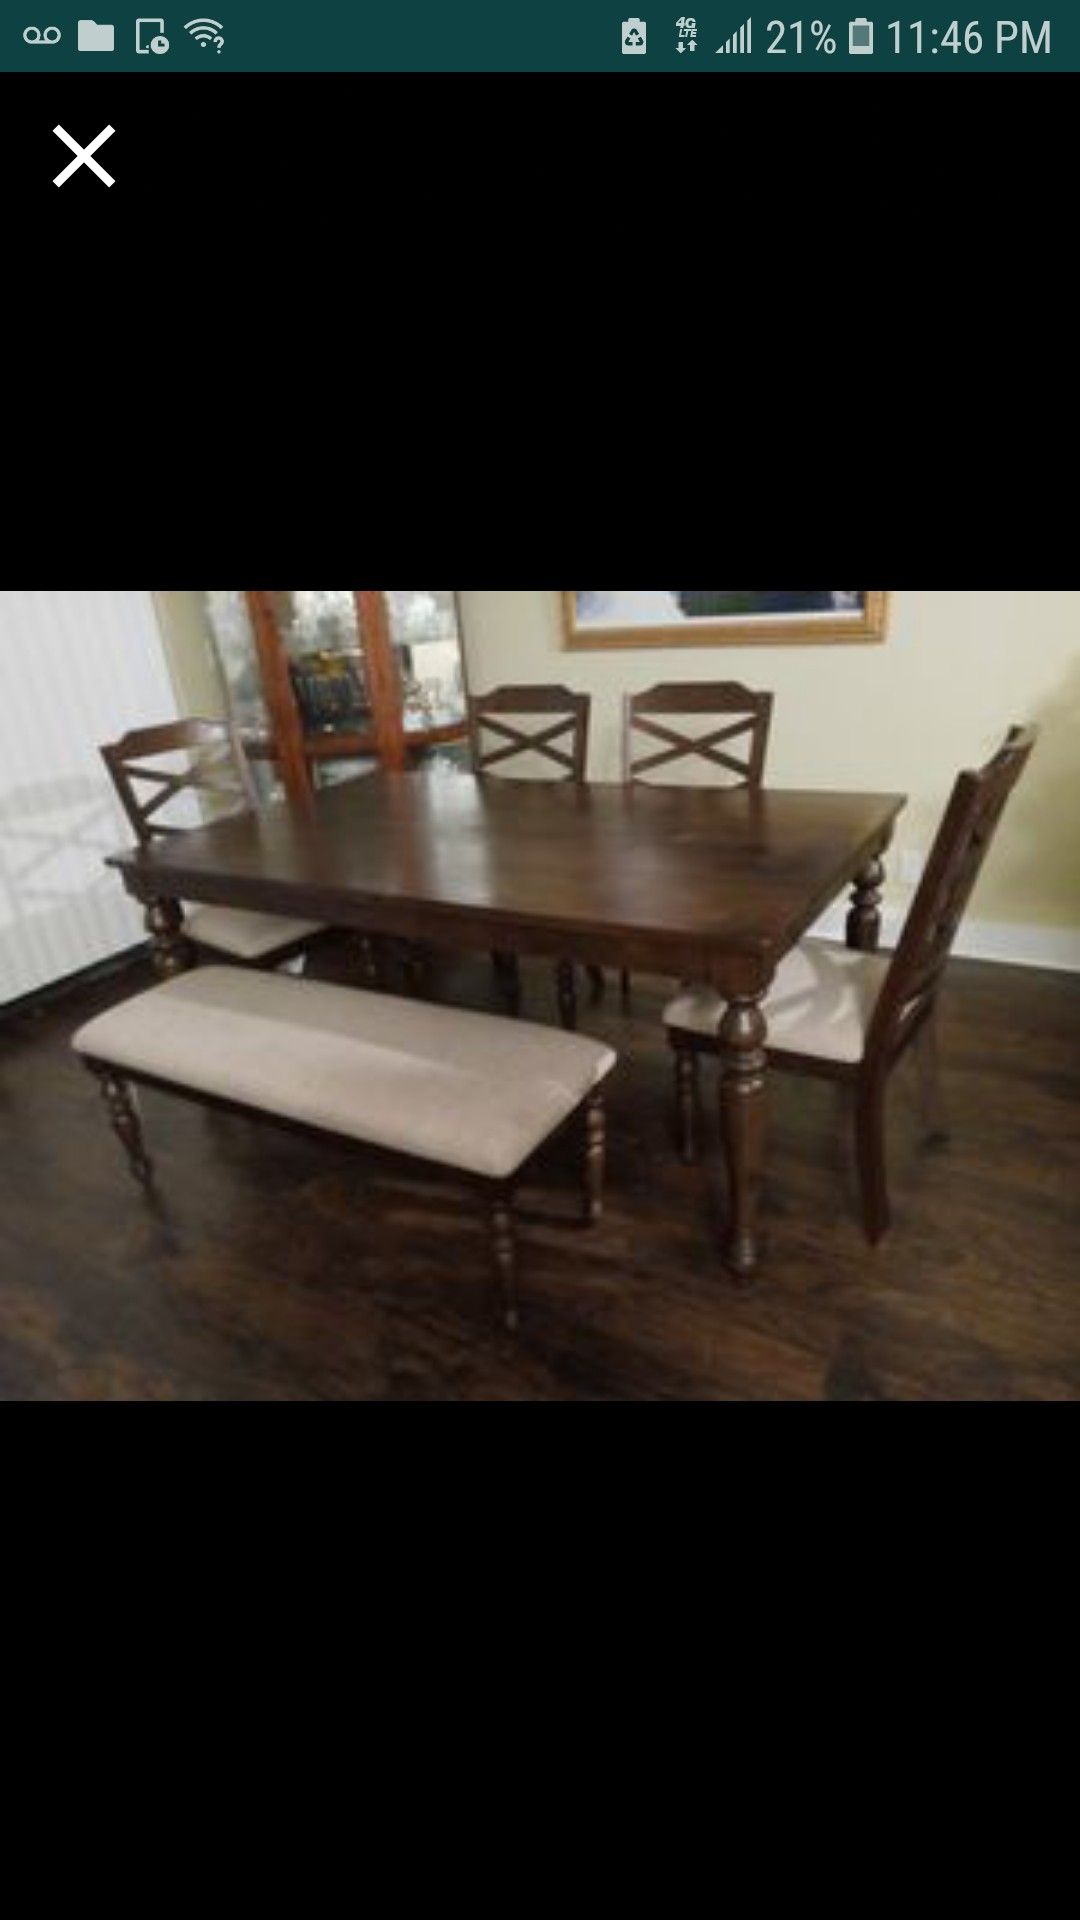 Farmhouse kitchen table with chairs and bench